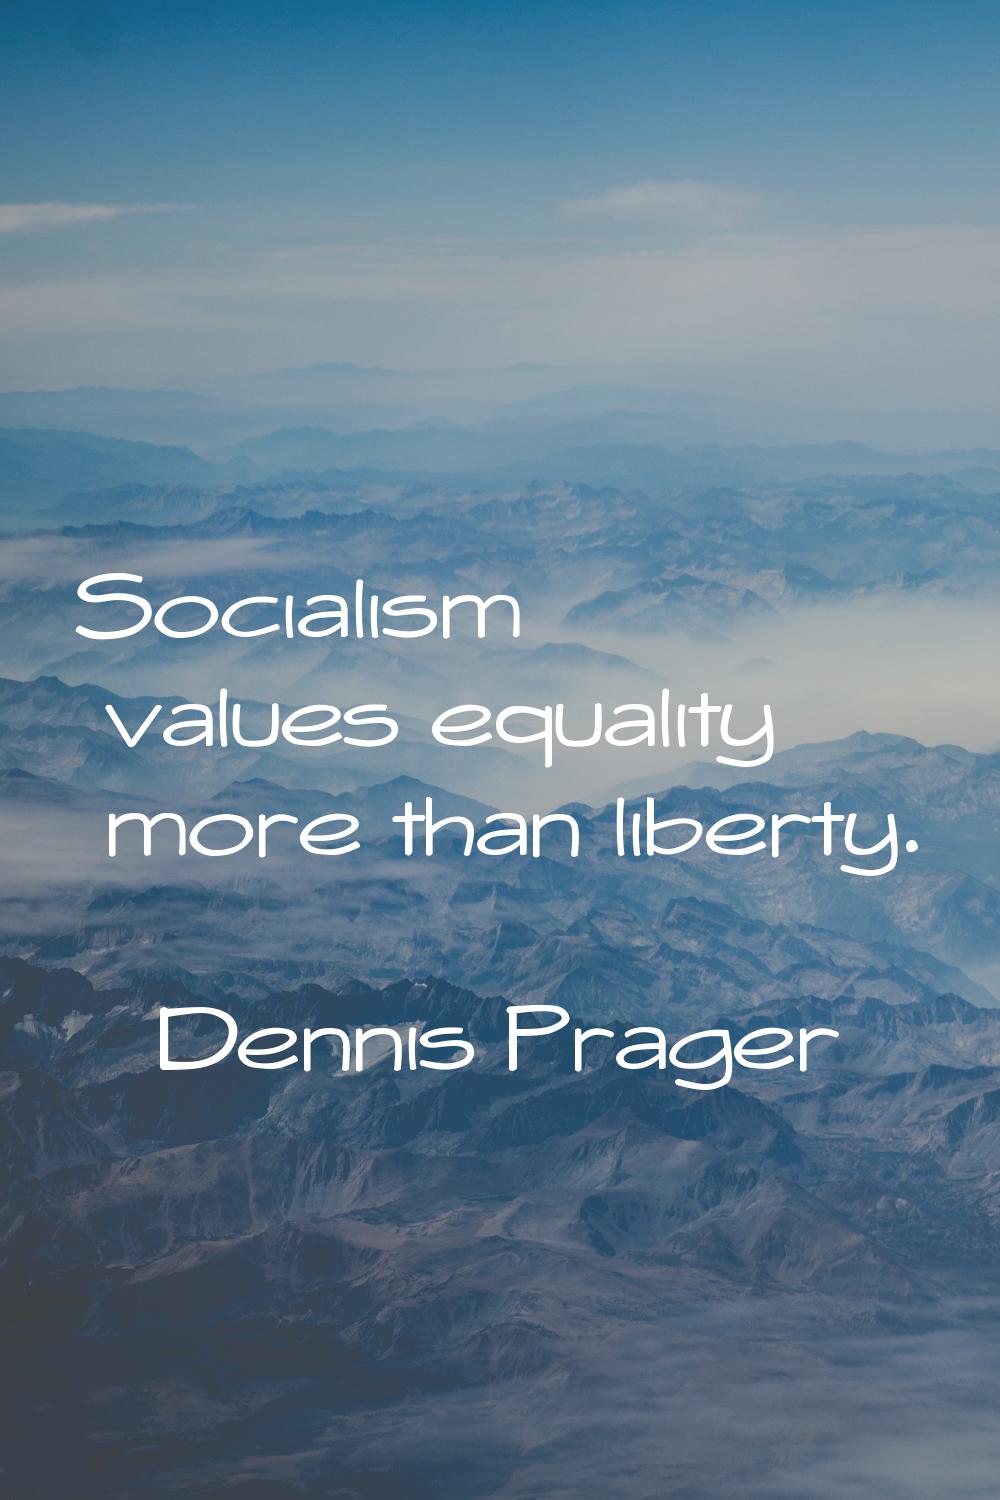 Socialism values equality more than liberty.